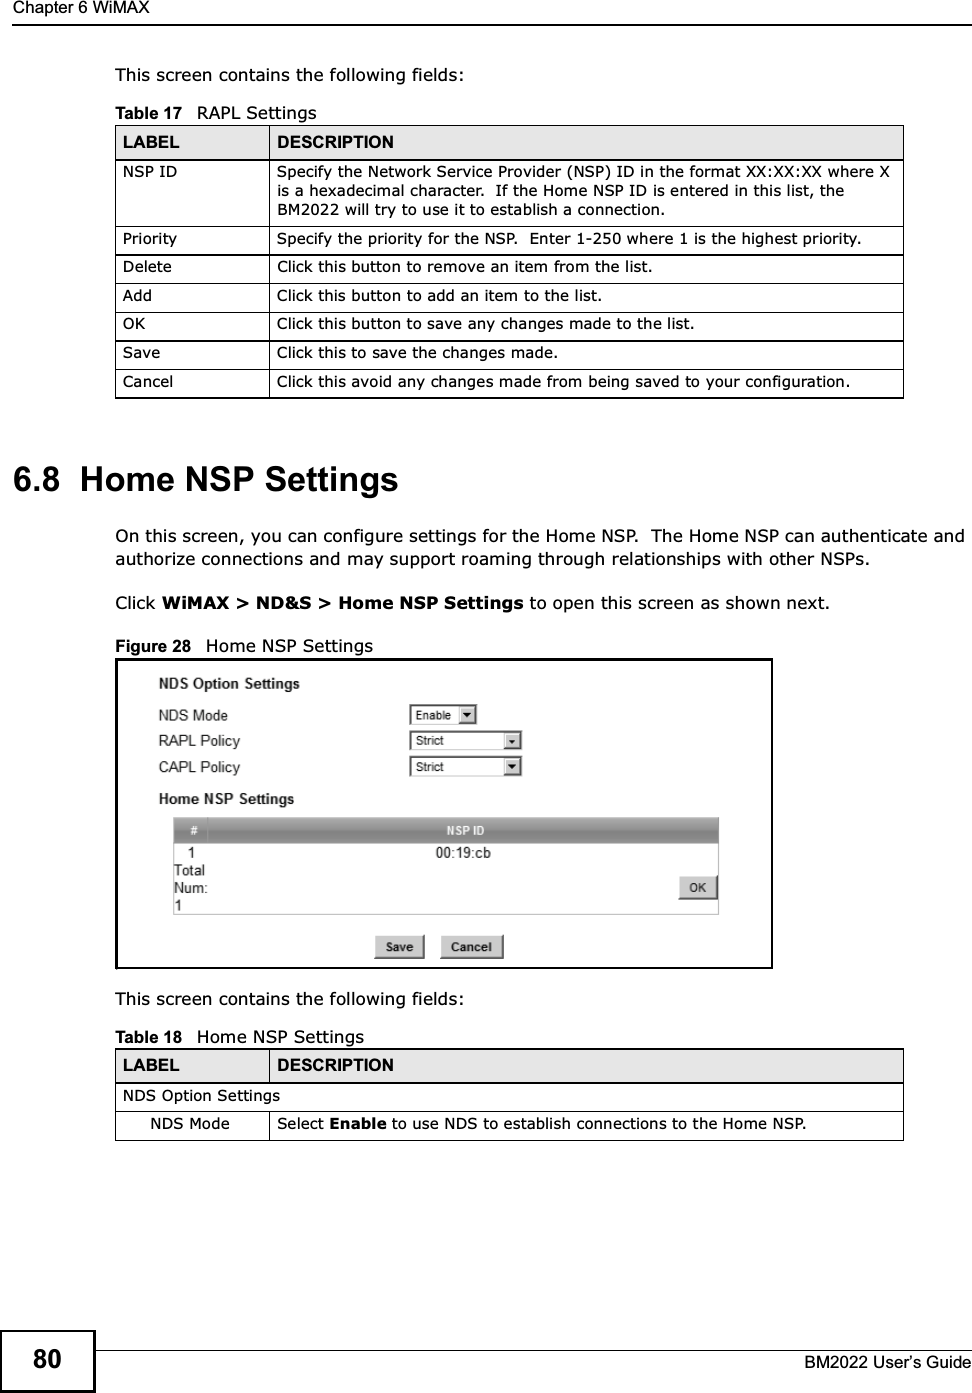 Chapter 6 WiMAXBM2022 Users Guide80This screen contains the following fields:6.8  Home NSP SettingsOn this screen, you can configure settings for the Home NSP.  The Home NSP can authenticate and authorize connections and may support roaming through relationships with other NSPs.Click WiMAX &gt; ND&amp;S &gt; Home NSP Settings to open this screen as shown next.Figure 28   Home NSP SettingsThis screen contains the following fields:Table 17   RAPL SettingsLABEL DESCRIPTIONNSP ID Specify the Network Service Provider (NSP) ID in the format XX:XX:XX where X is a hexadecimal character.  If the Home NSP ID is entered in this list, the BM2022 will try to use it to establish a connection.Priority Specify the priority for the NSP.  Enter 1-250 where 1 is the highest priority.Delete Click this button to remove an item from the list.Add Click this button to add an item to the list.OK Click this button to save any changes made to the list.Save Click this to save the changes made.Cancel Click this avoid any changes made from being saved to your configuration.Table 18   Home NSP SettingsLABEL DESCRIPTIONNDS Option SettingsNDS Mode Select Enable to use NDS to establish connections to the Home NSP.